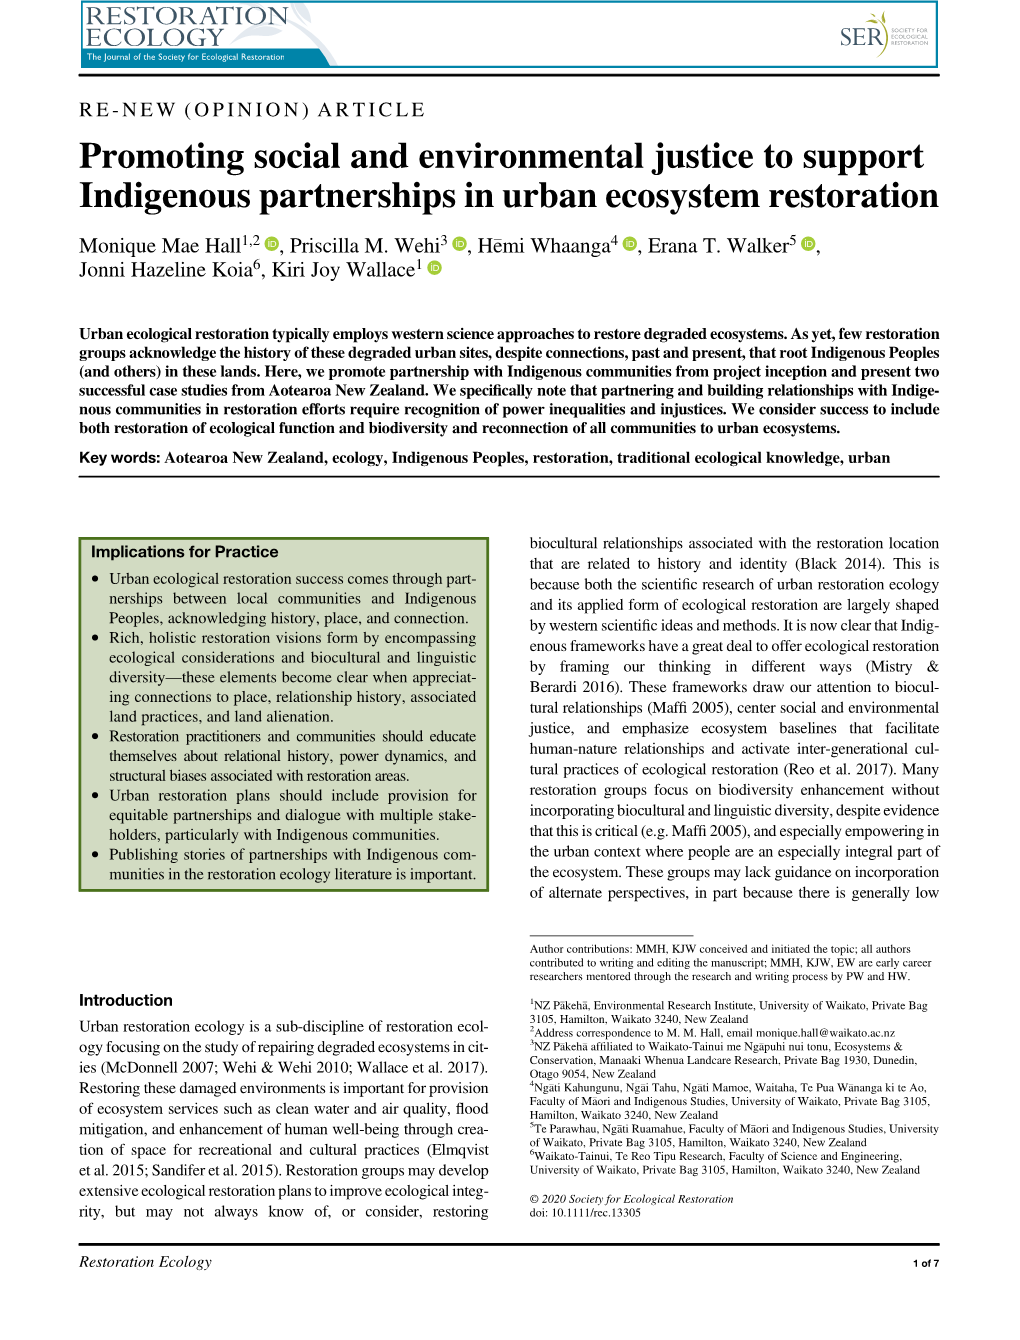 Promoting Social and Environmental Justice to Support Indigenous Partnerships in Urban Ecosystem Restoration Monique Mae Hall1,2 , Priscilla M